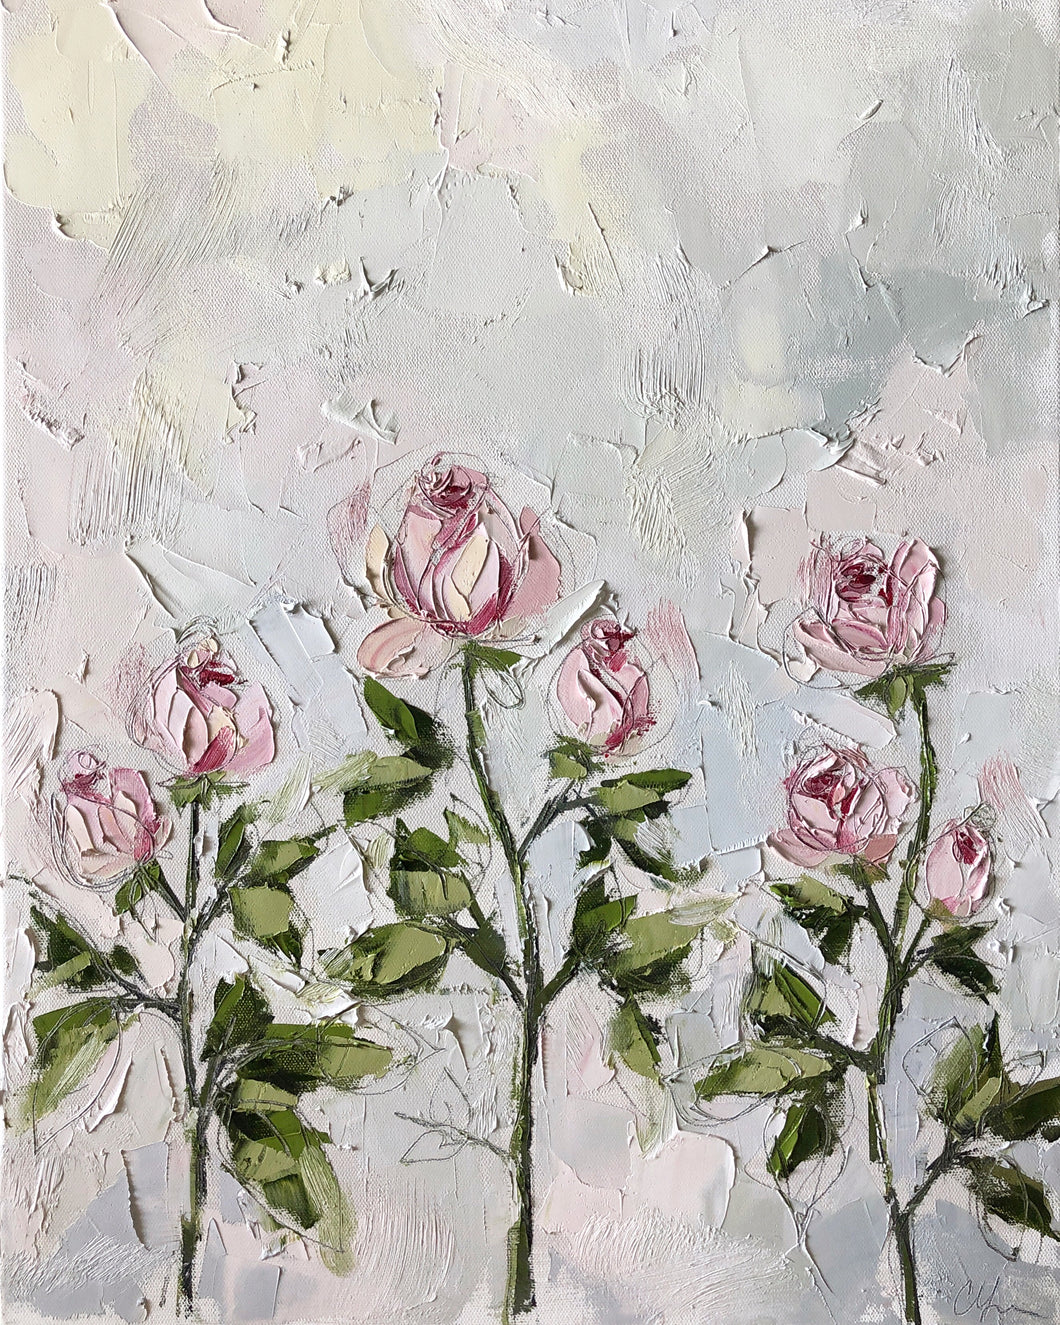 “Roses” 24x18 Oil/Graphite on Canvas